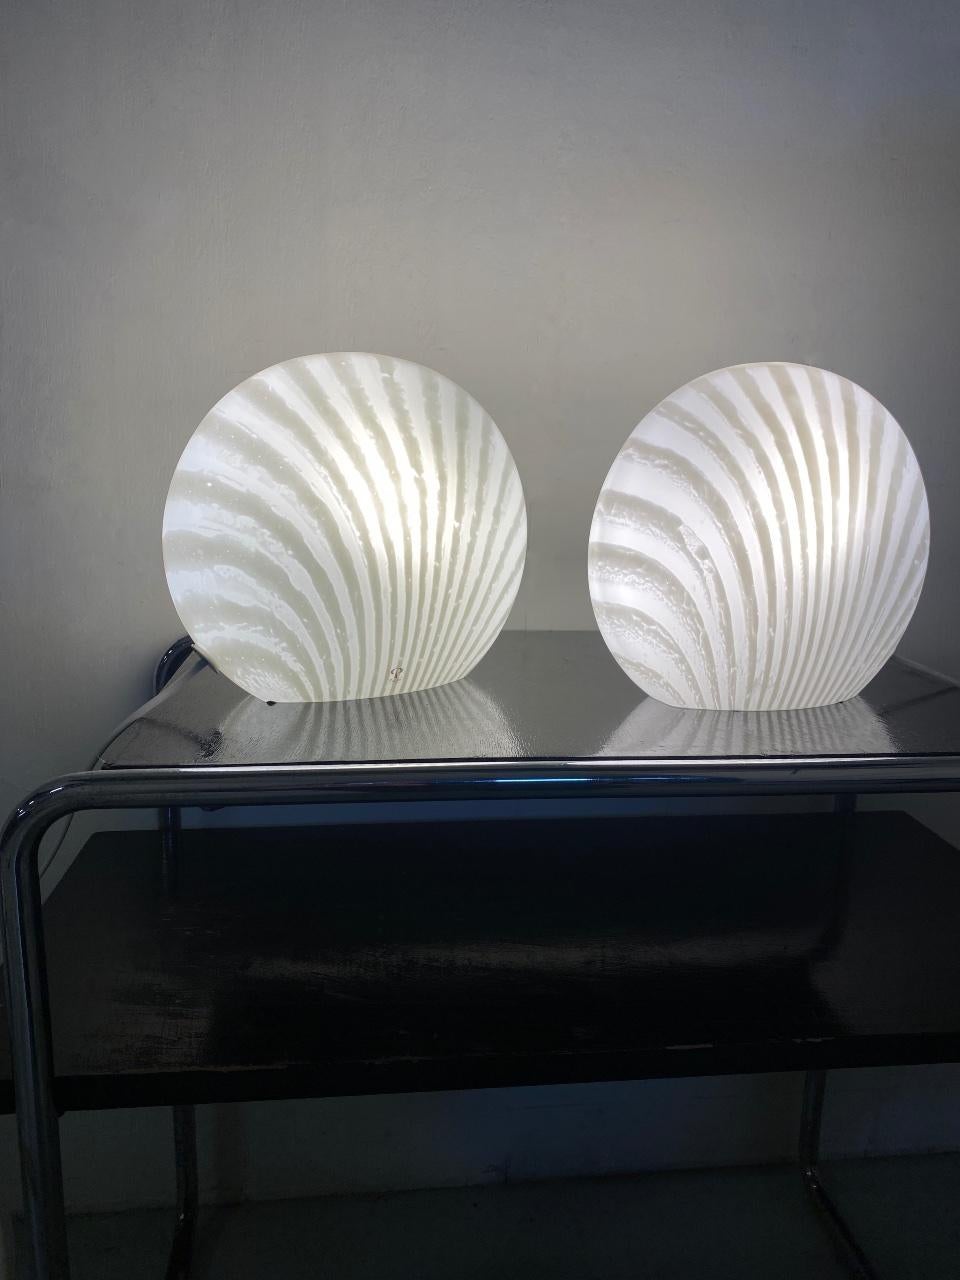 Magical and stylish Zebra pattern table lamps. The lamps are made by the renowned German manufacturer Peill Putzler. They are made of high quality mouth blown glass in one piece. 

You could style them in your living room or bed room. And then